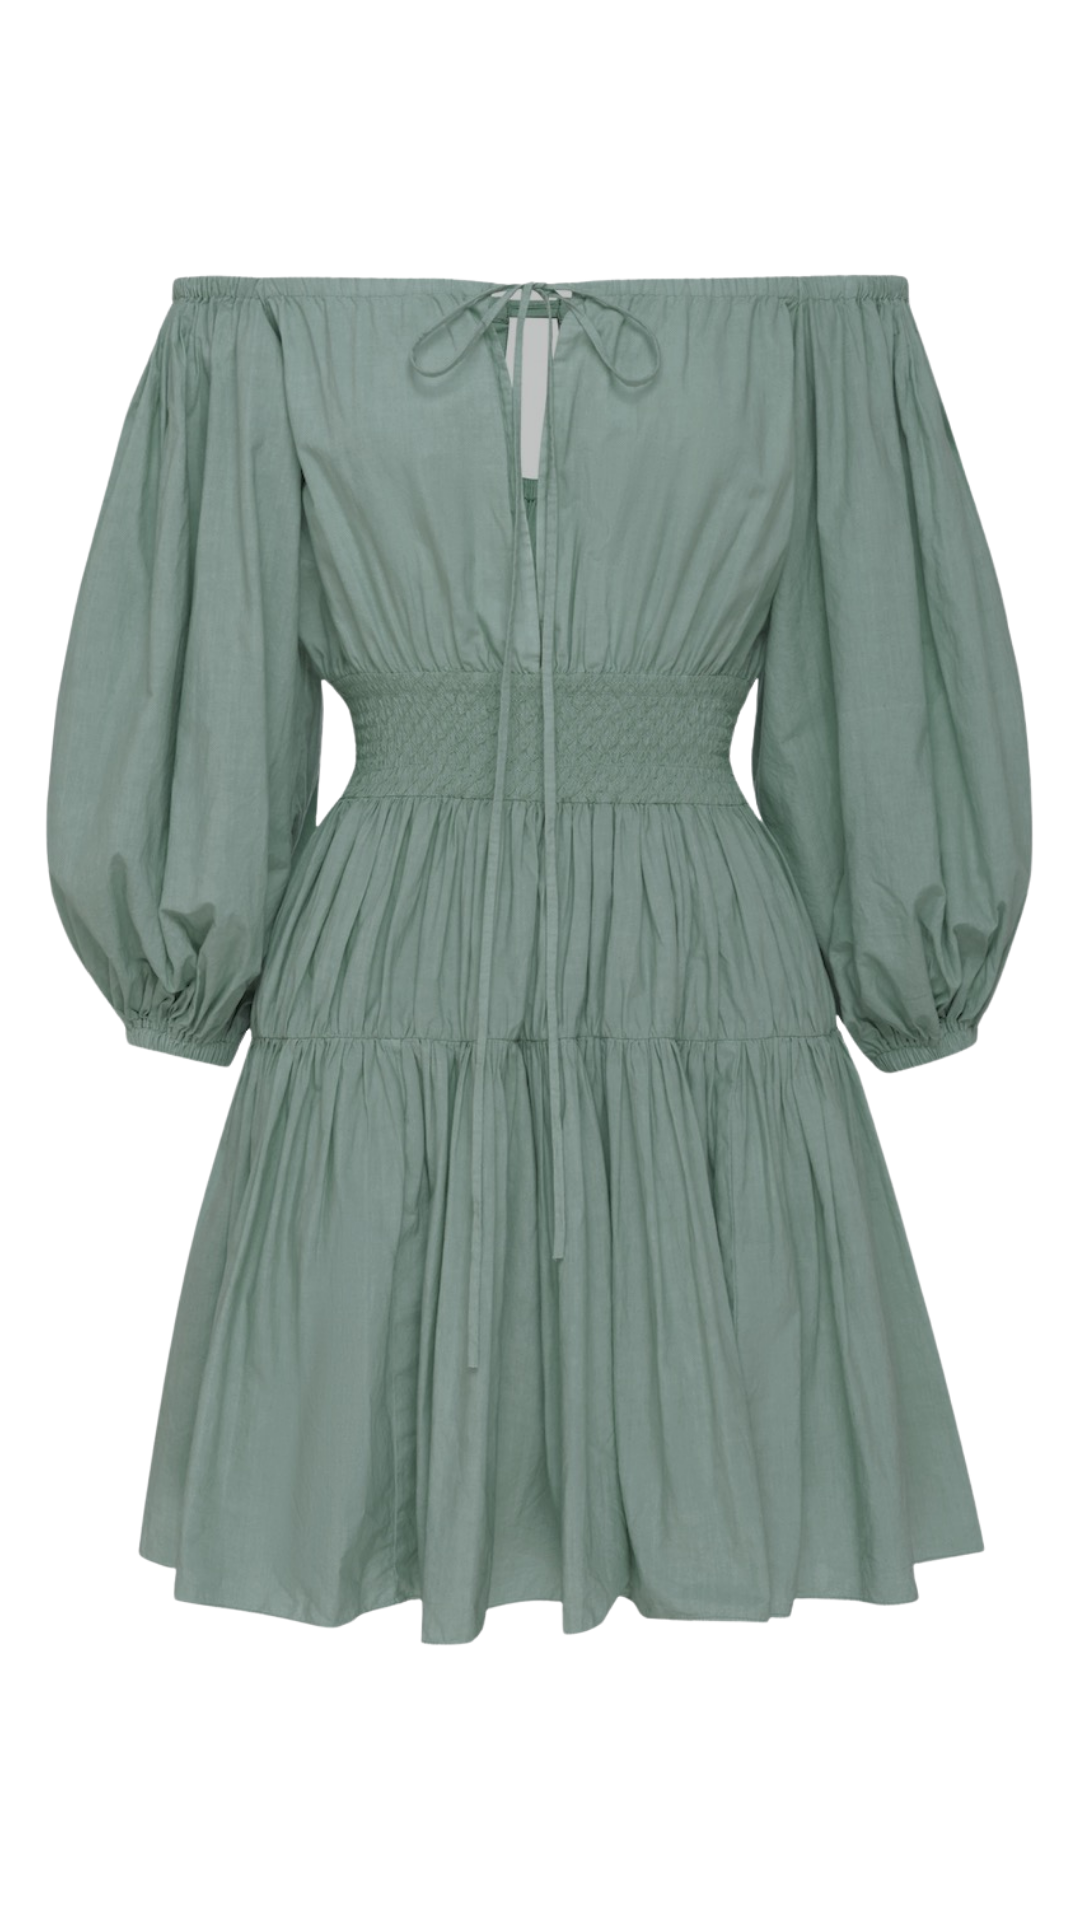 sage green 3/4 sleeve tiered mini dress for spring